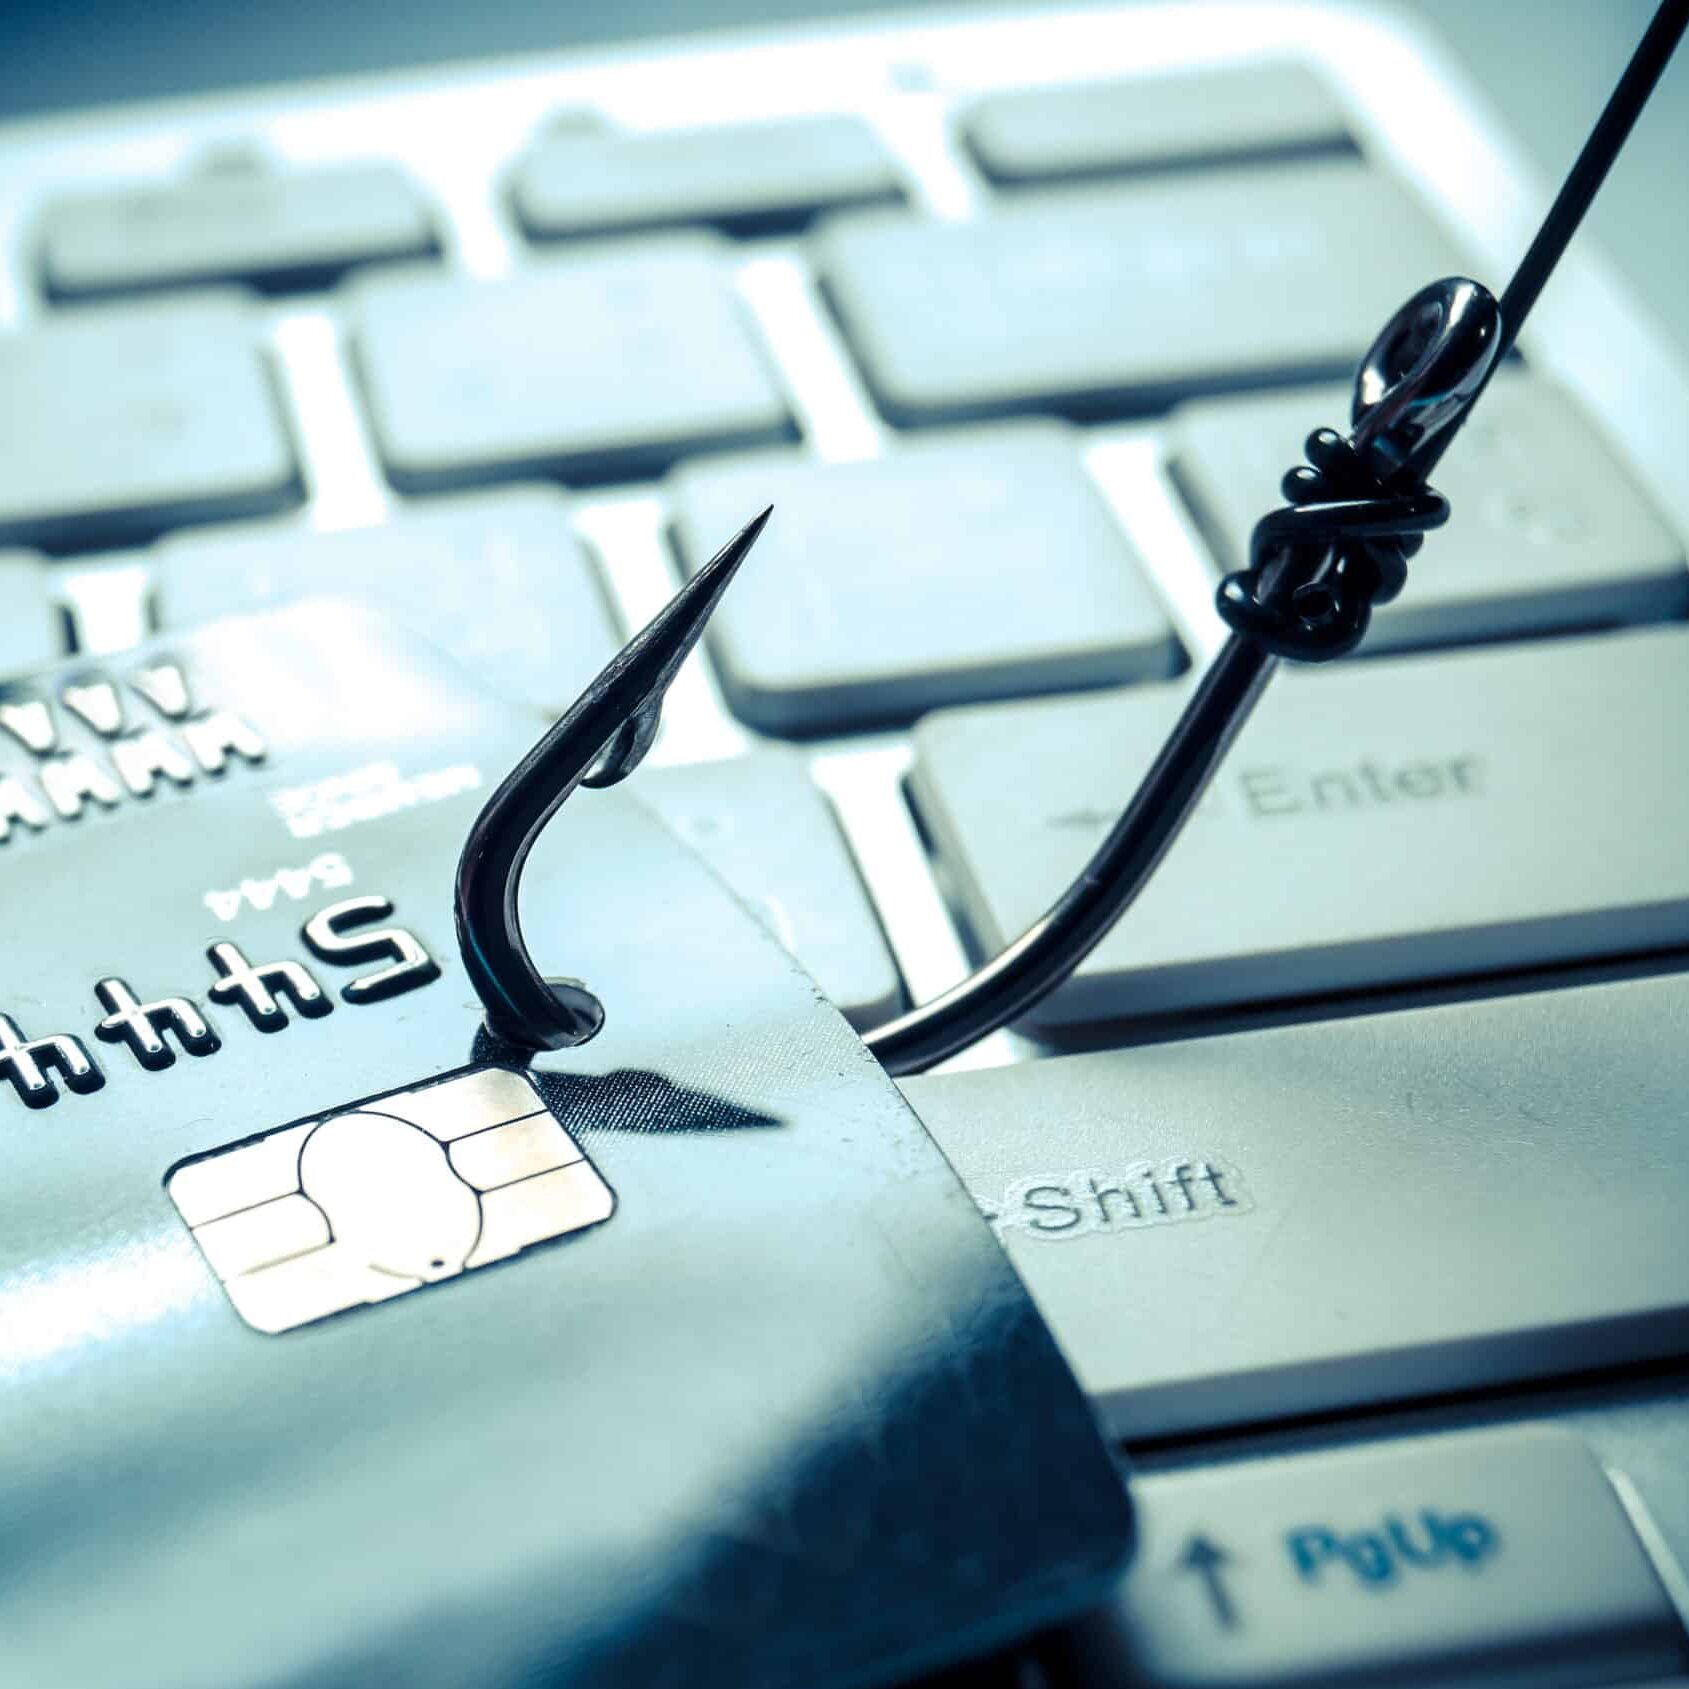 A fishing hook catches a credit card on a computer keyboard to symbolise financial phishing scams.